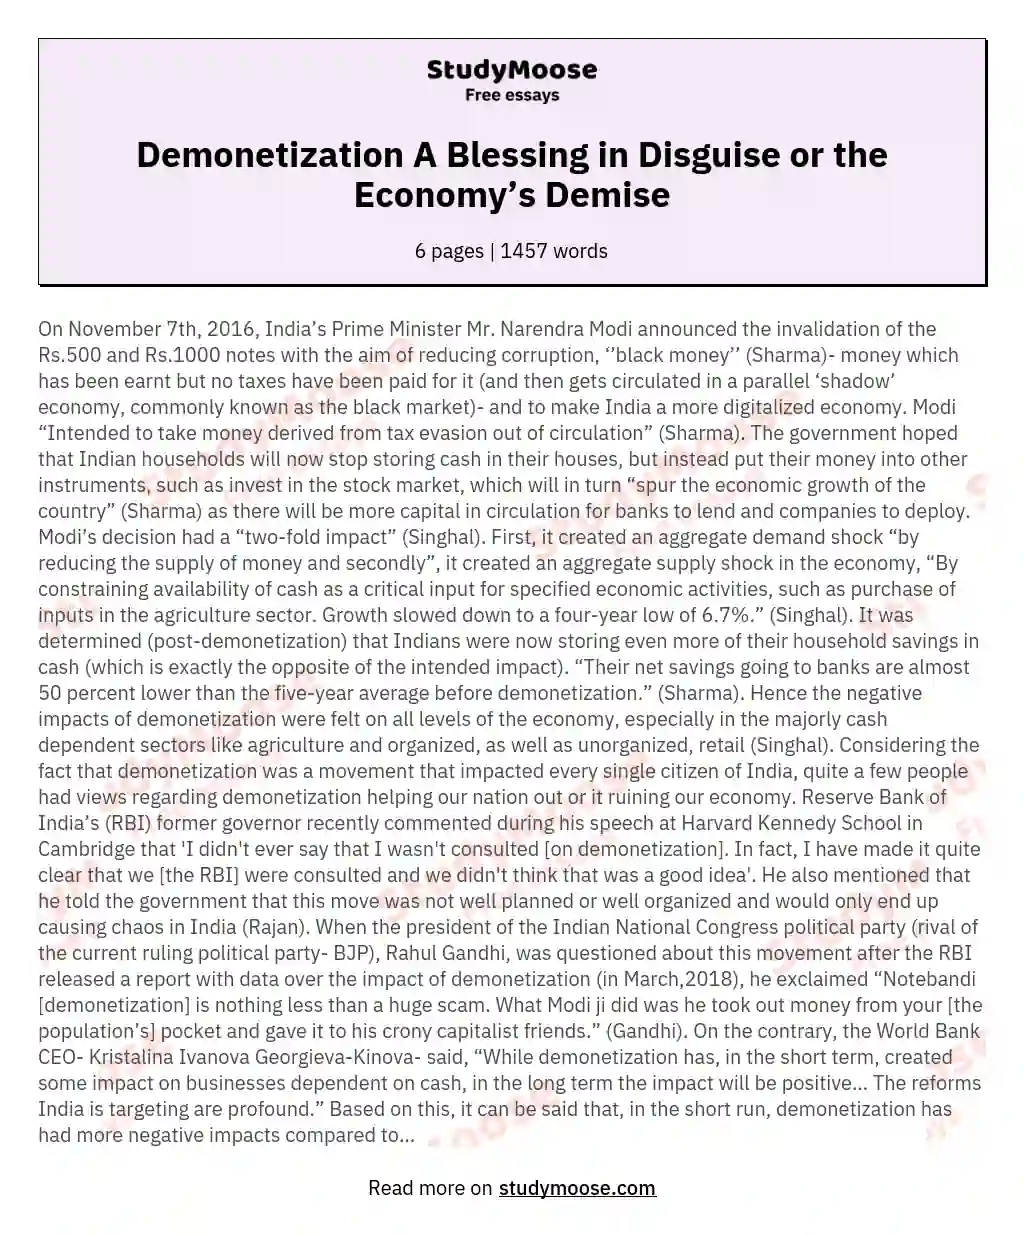 Demonetization A Blessing in Disguise or the Economy’s Demise essay